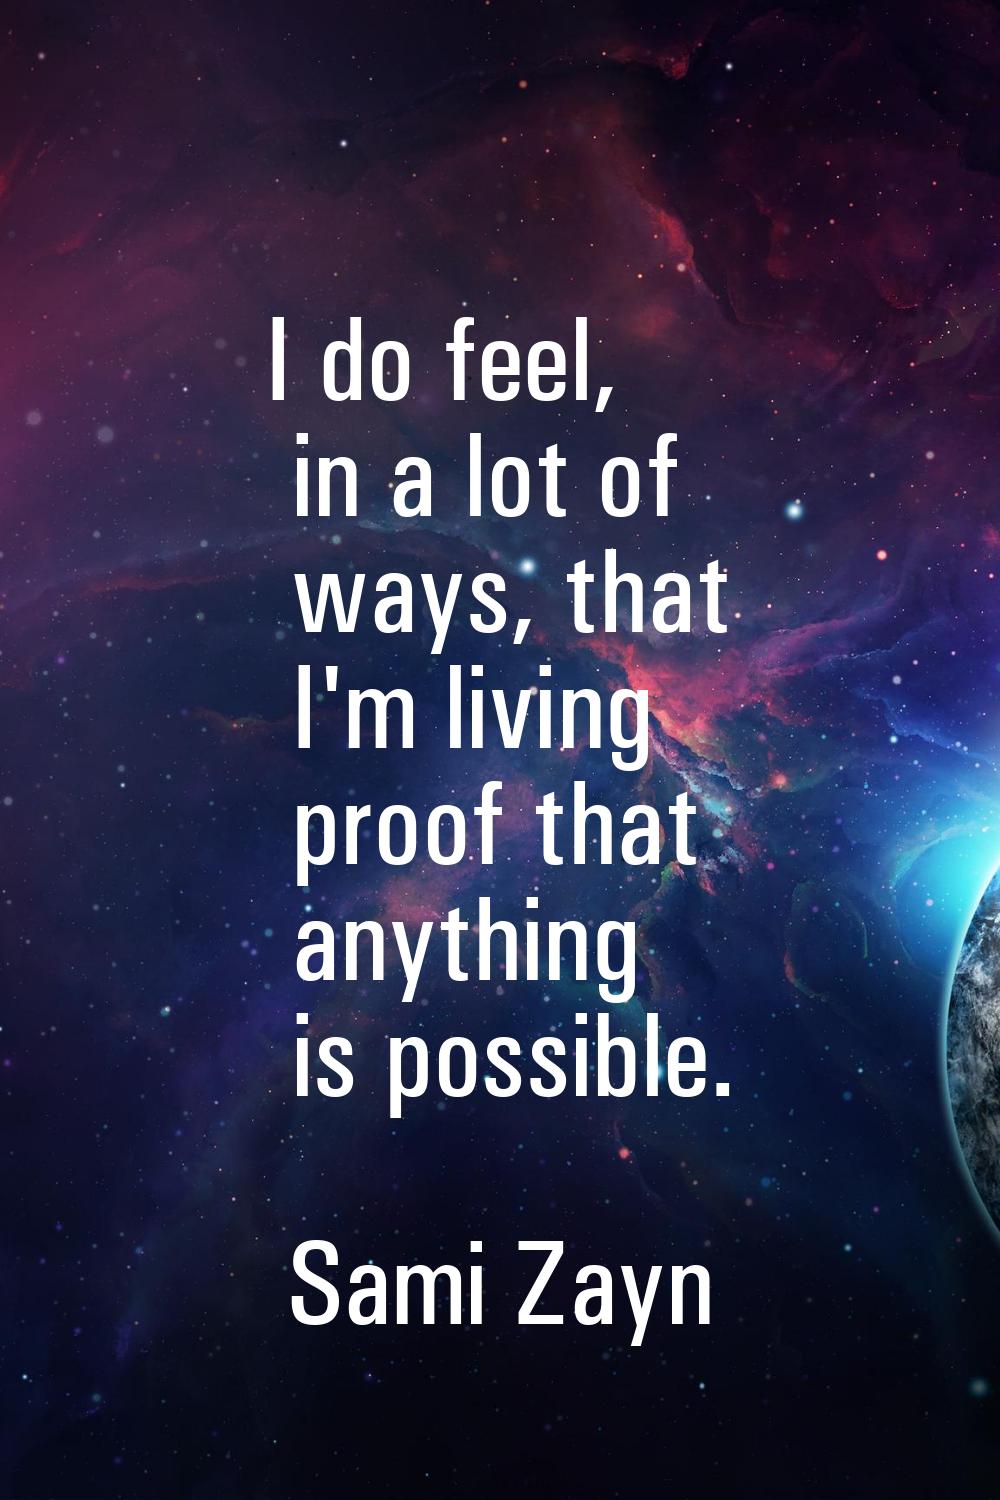 I do feel, in a lot of ways, that I'm living proof that anything is possible.